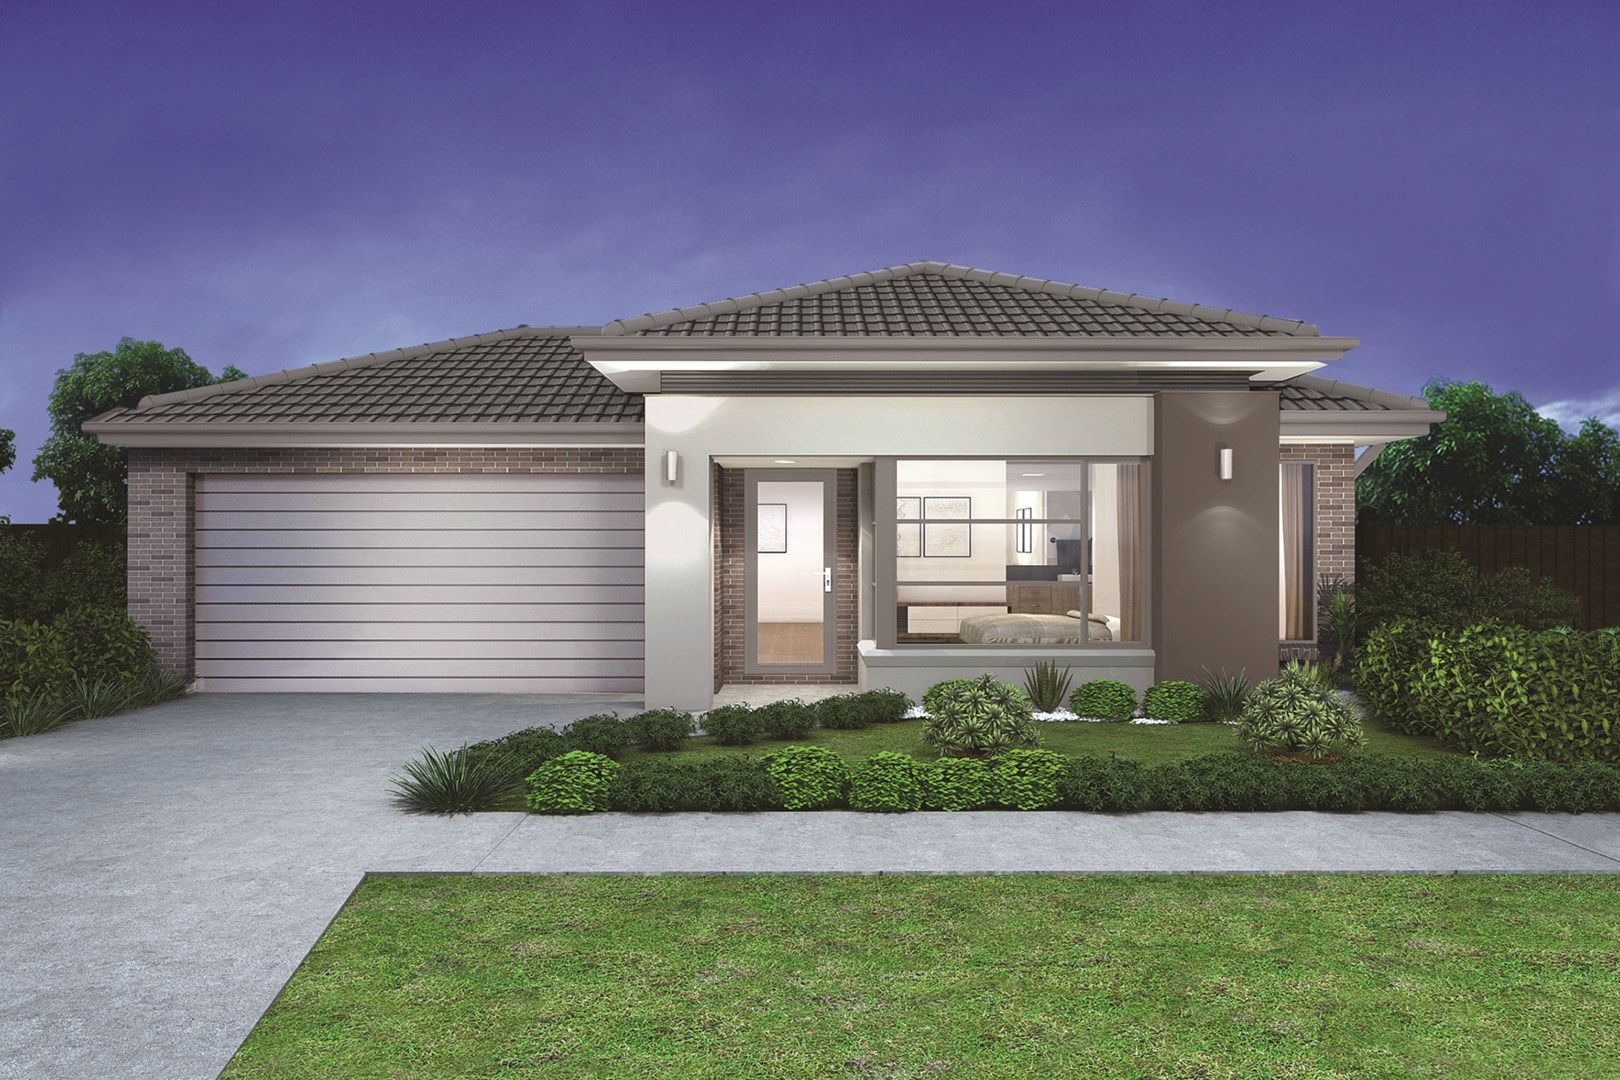 4 bedrooms New House & Land in Lot 817 Grimsby Avenue 'Aldo estate' FRASER RISE VIC, 3336